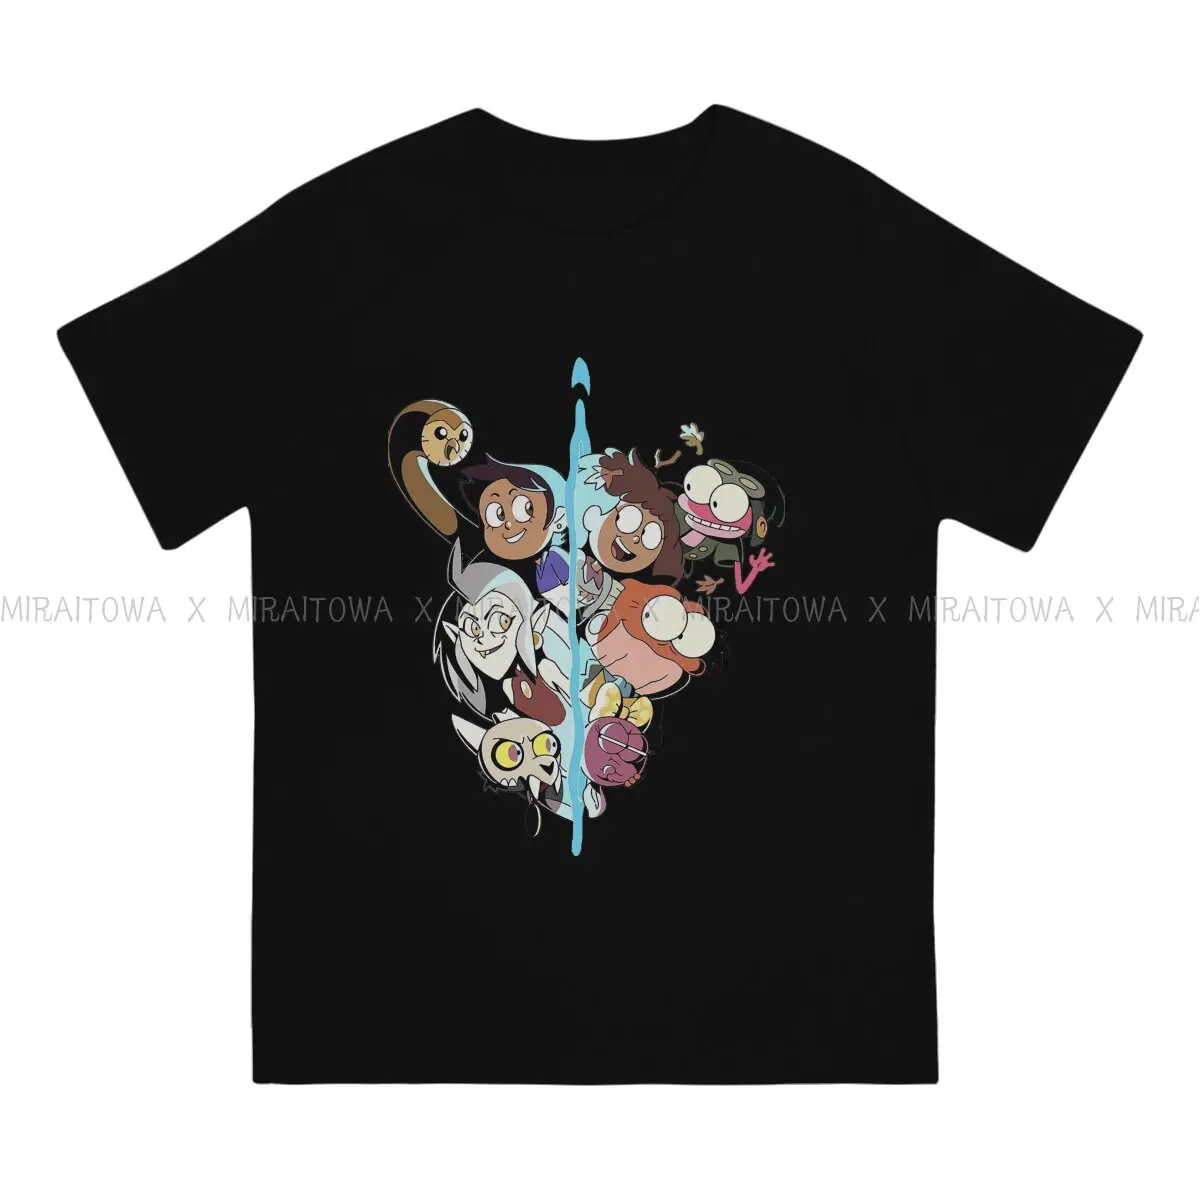 Amphibia Frog Anime The Owl House Friend Tshirt Graphic Men Tops Vintage Goth Tees Clothes Cotton 1 - The Owl House Plush